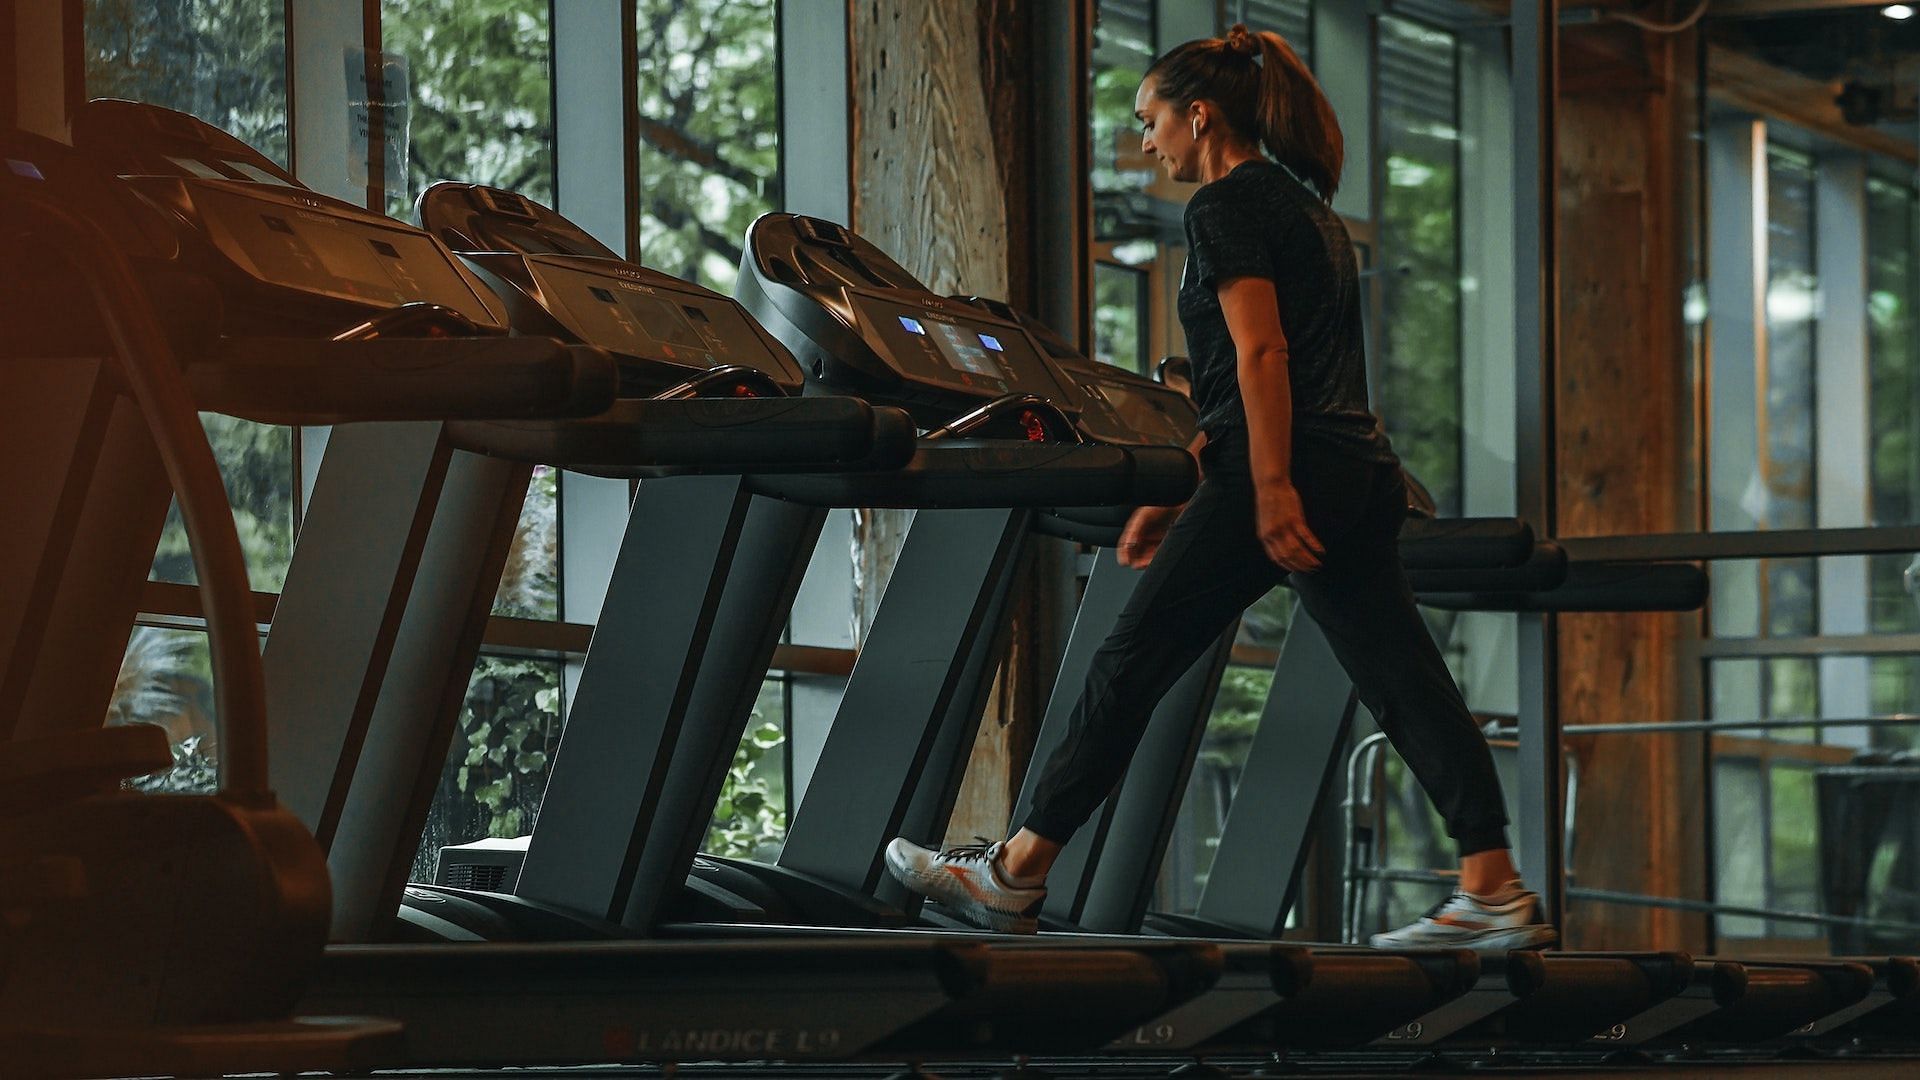 Treadmills and outdoor runs have their own pros and cons. image via Unsplash/Mike Cox